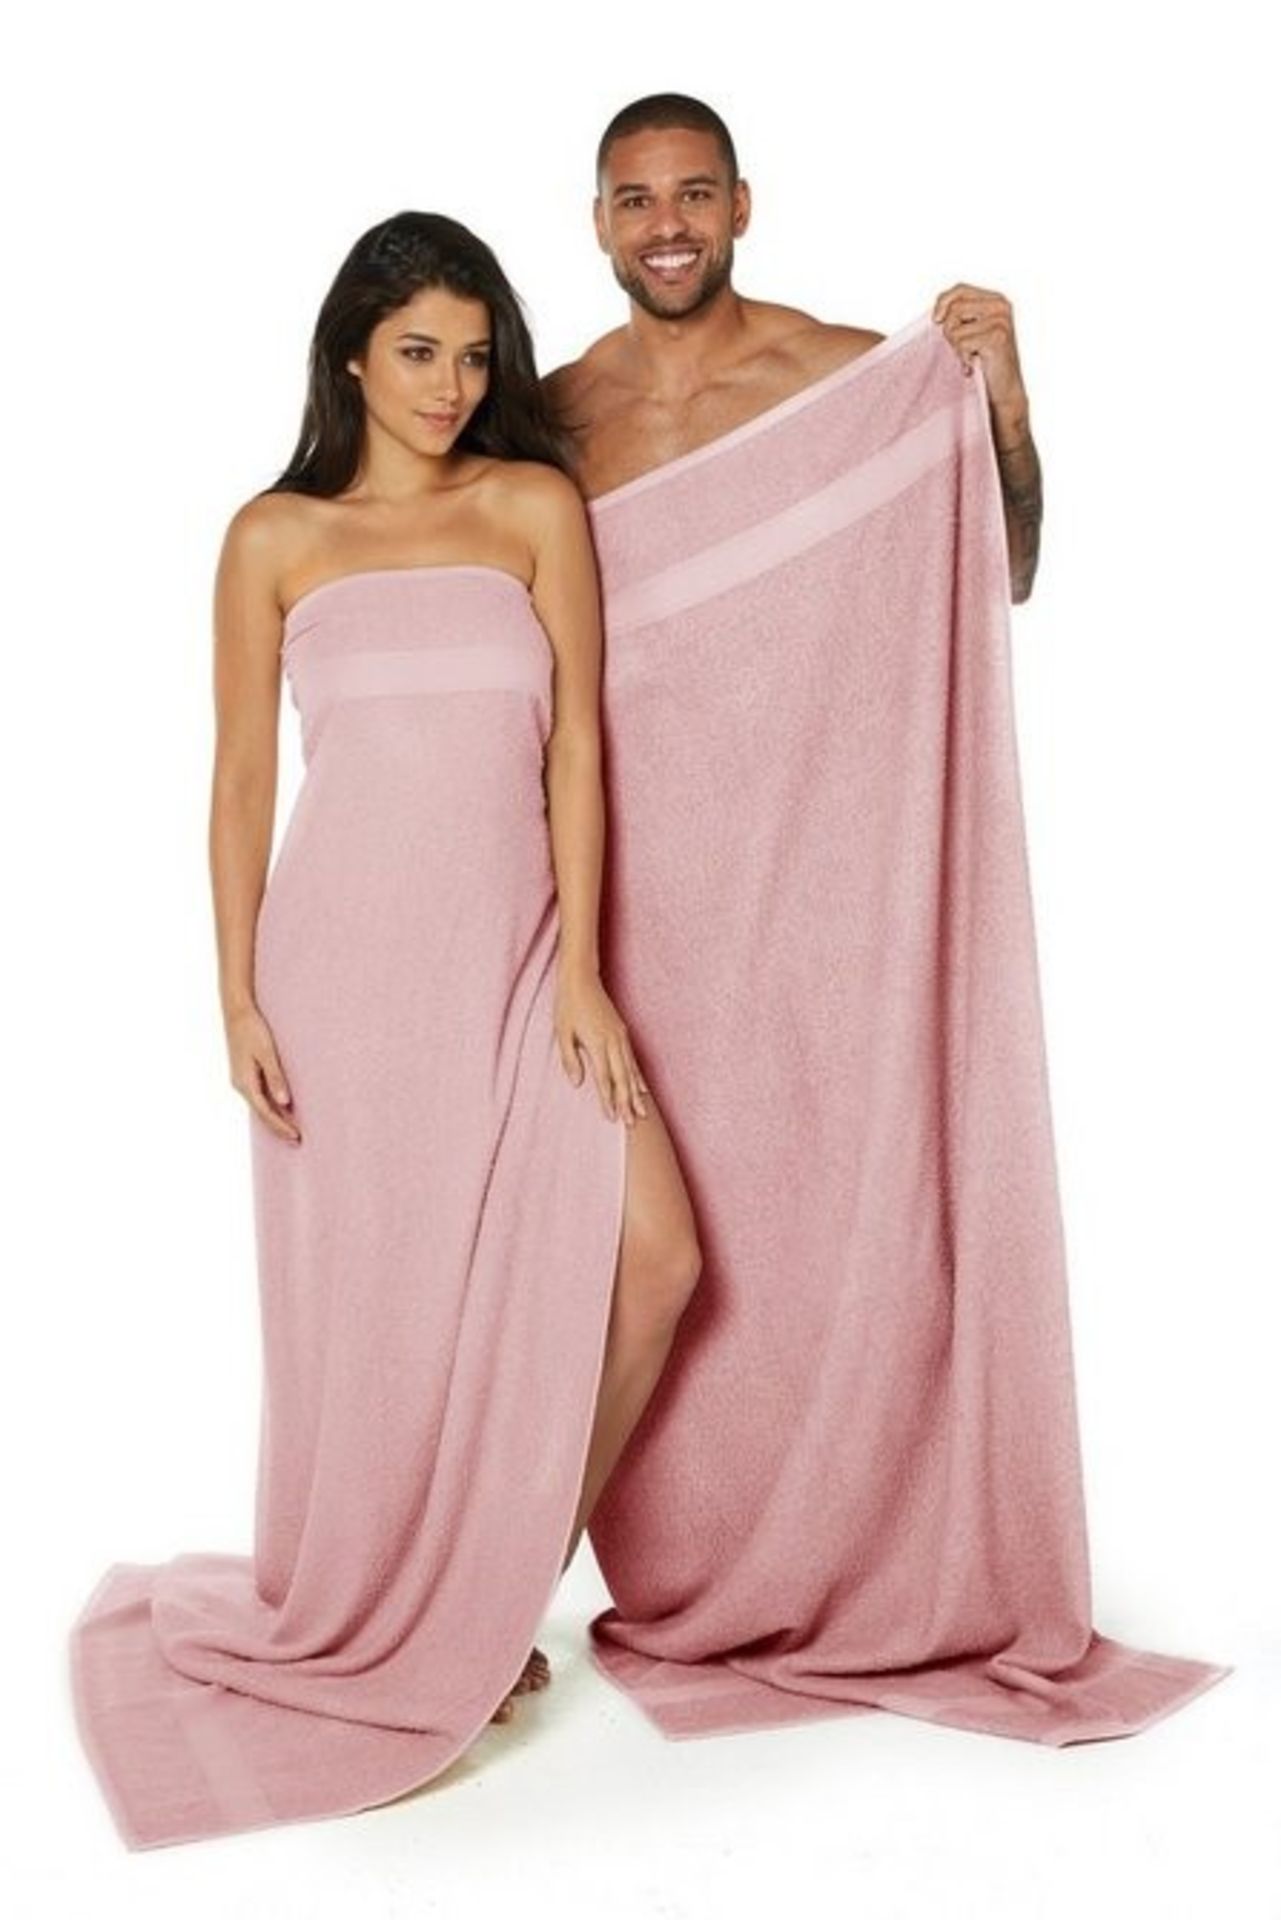 1 BAGGED SET OF TWO JUMBO TOWELS IN BLUSH PINK (PUBLIC VIEWING AVAILABLE)